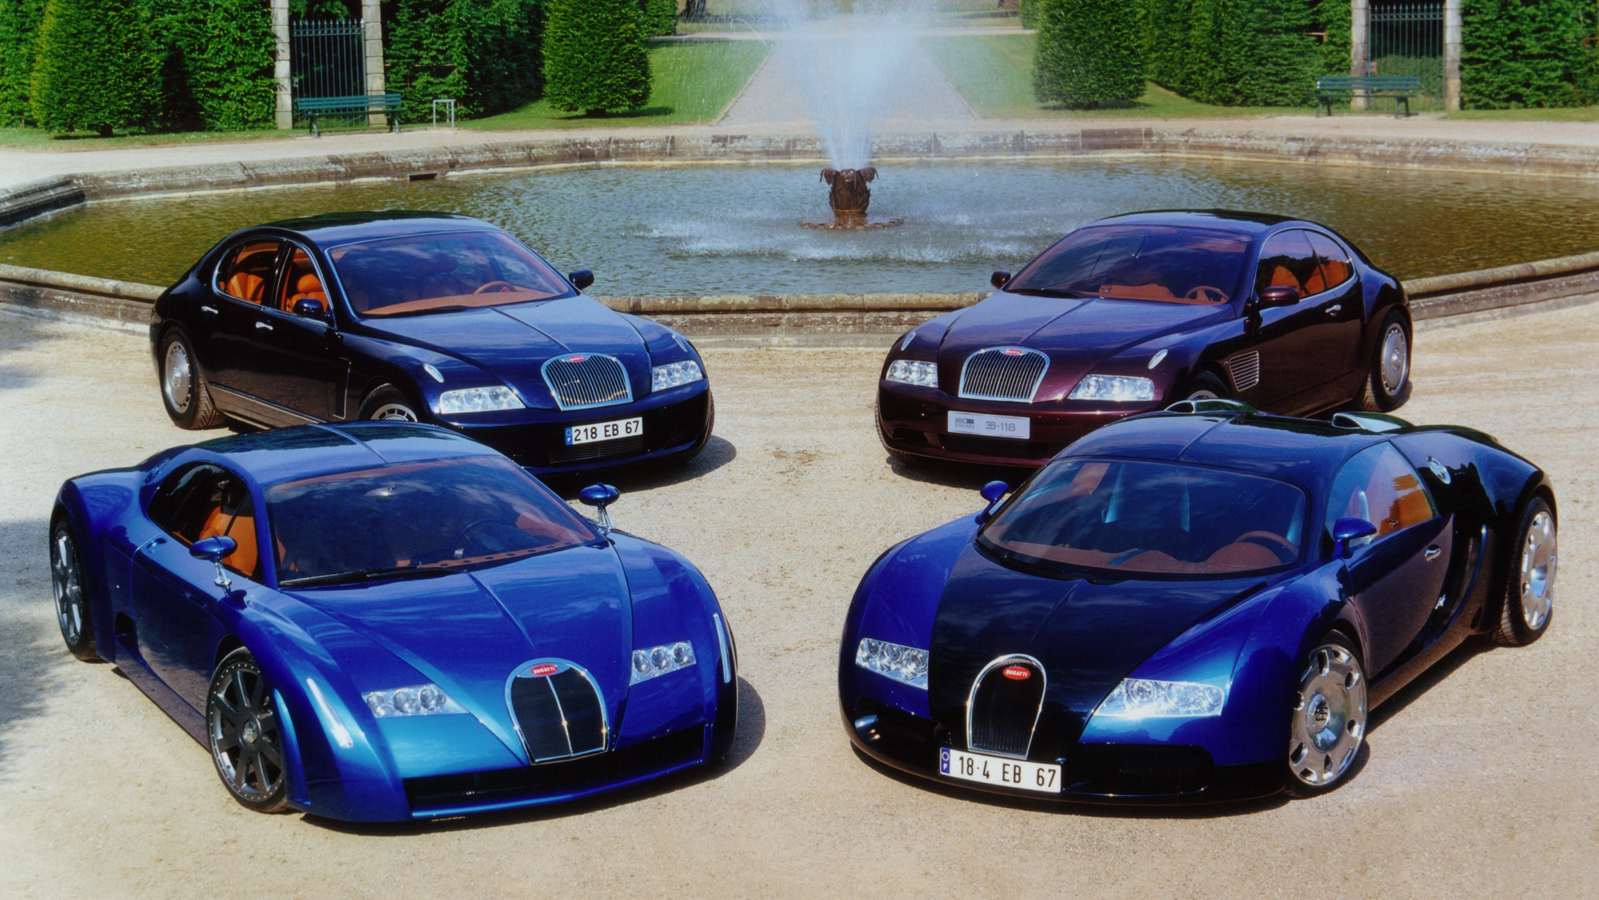 Detail Images Of Bugatti Cars Nomer 25